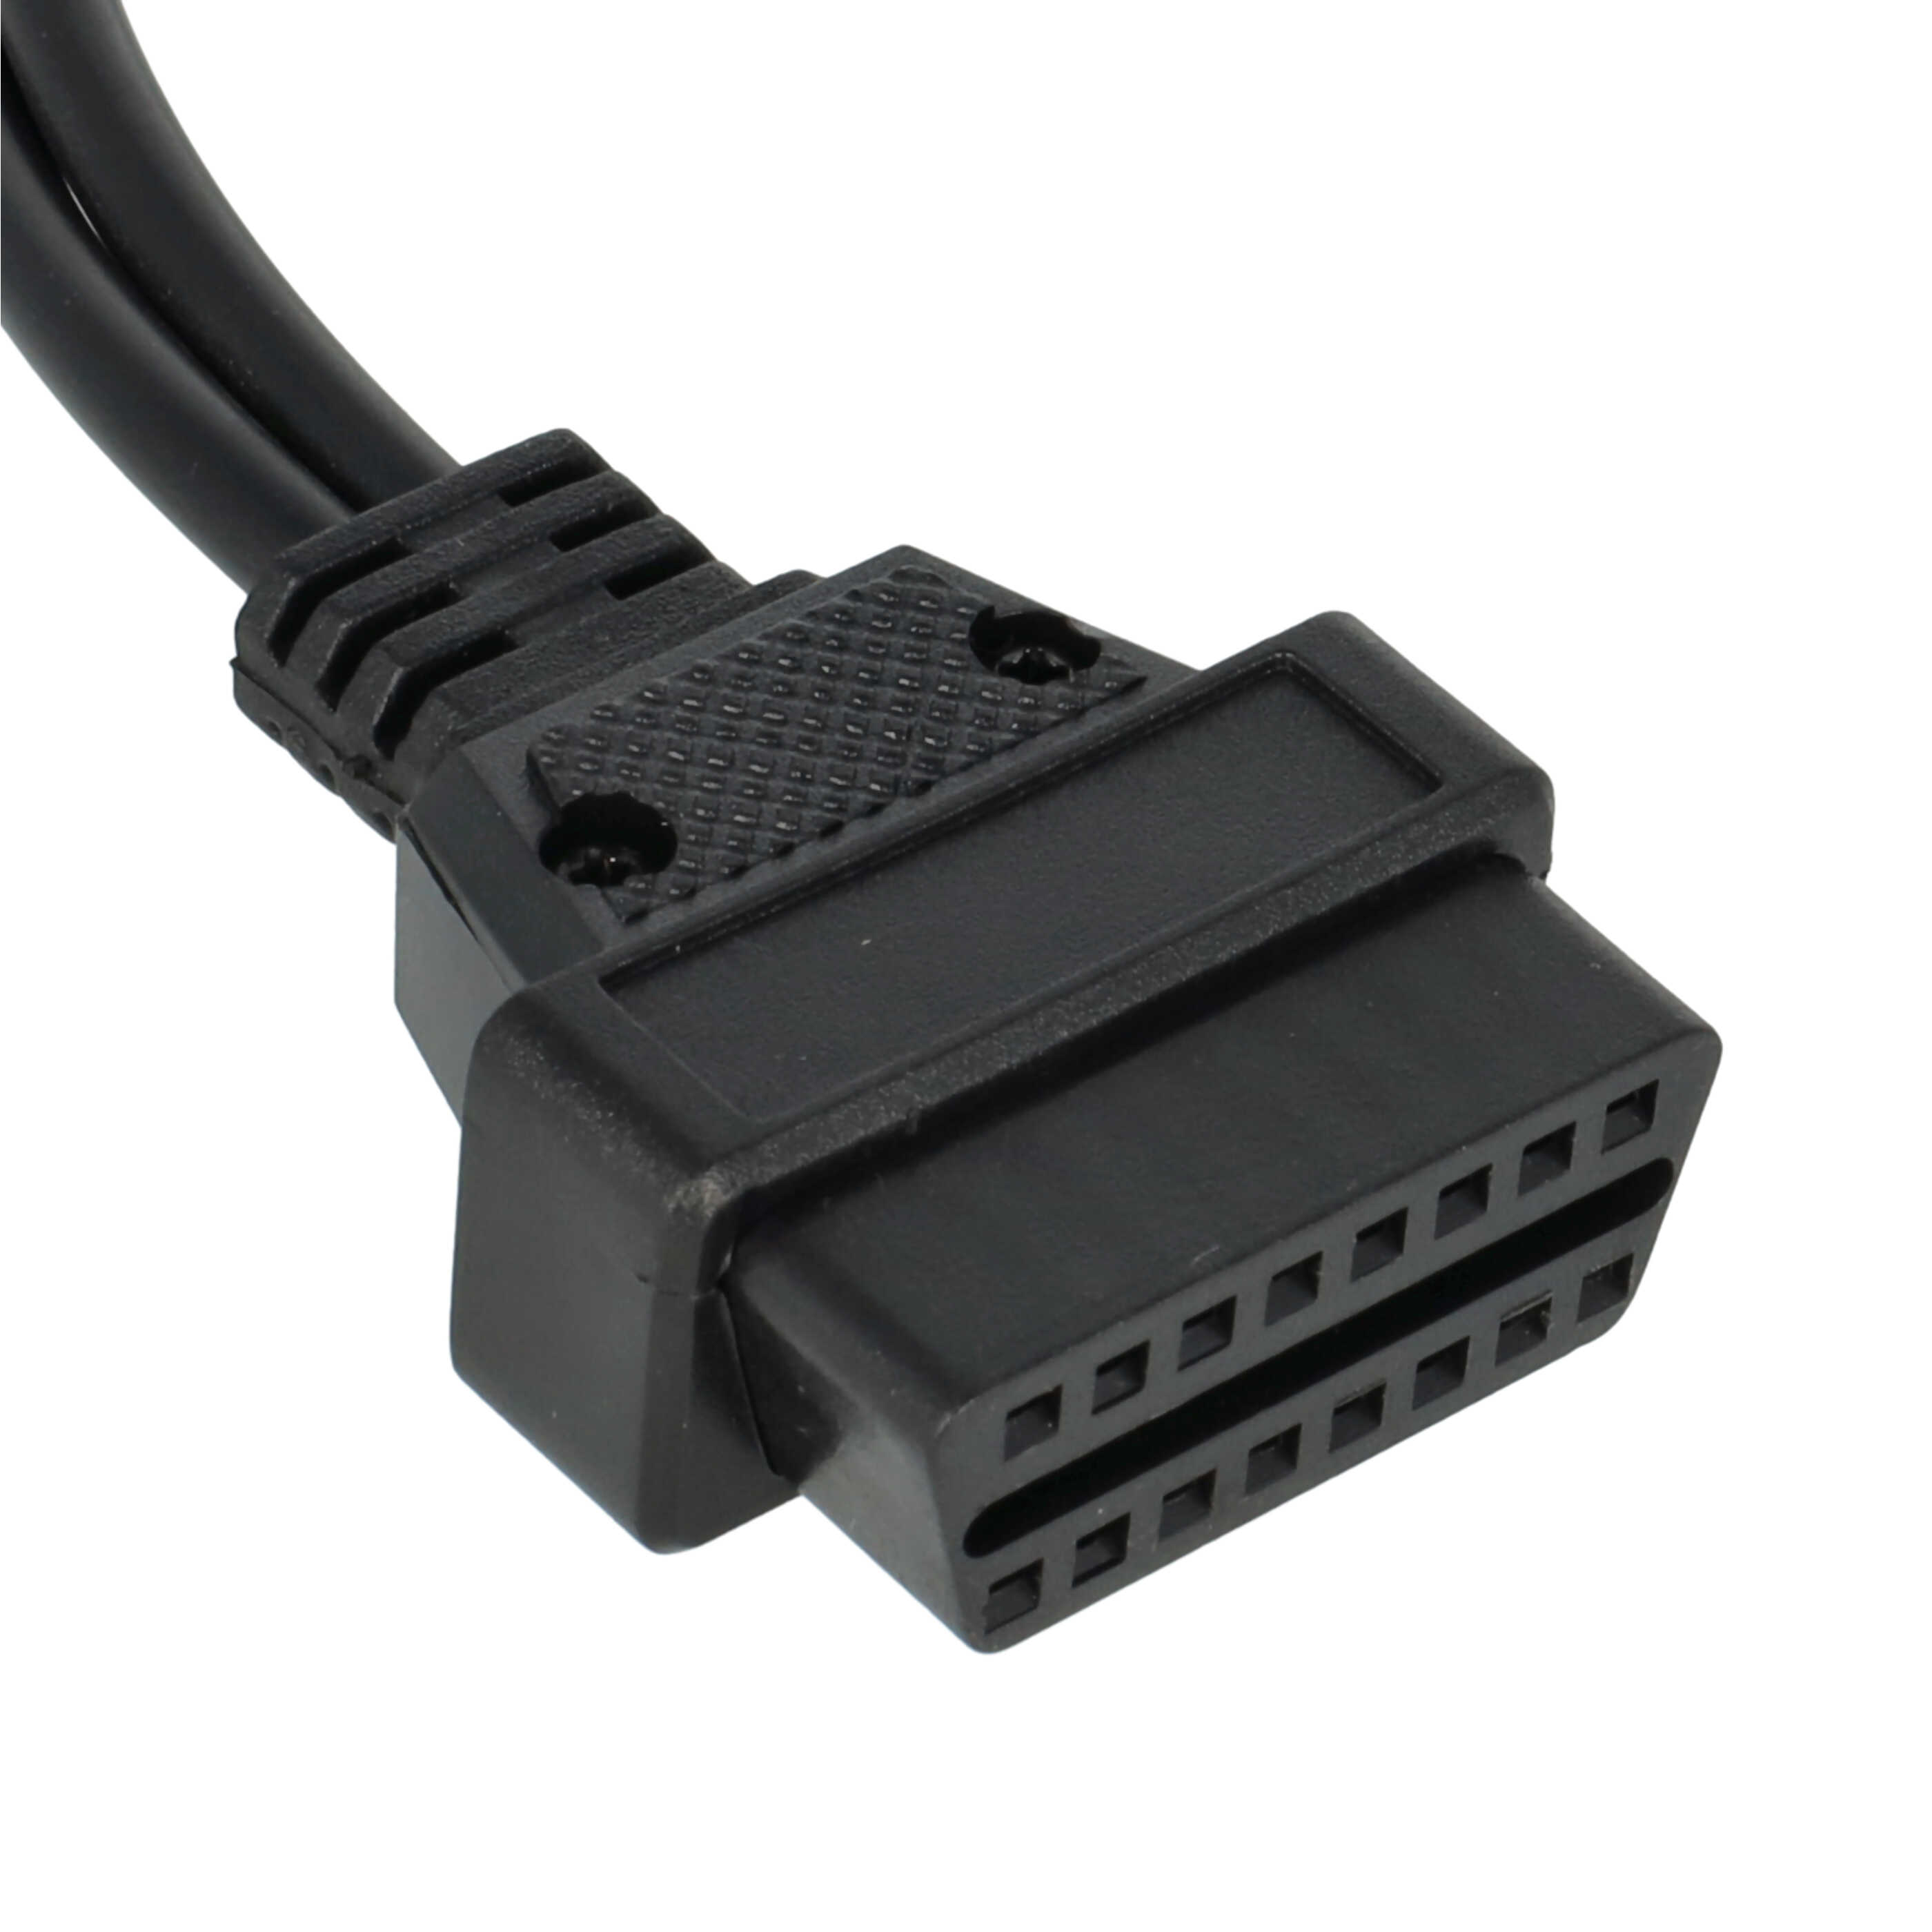 vhbw OBD2 Adapter 4Pin OBD1 to OBD2 suitable for 100 C4 Audi Vehicle - 30 cm